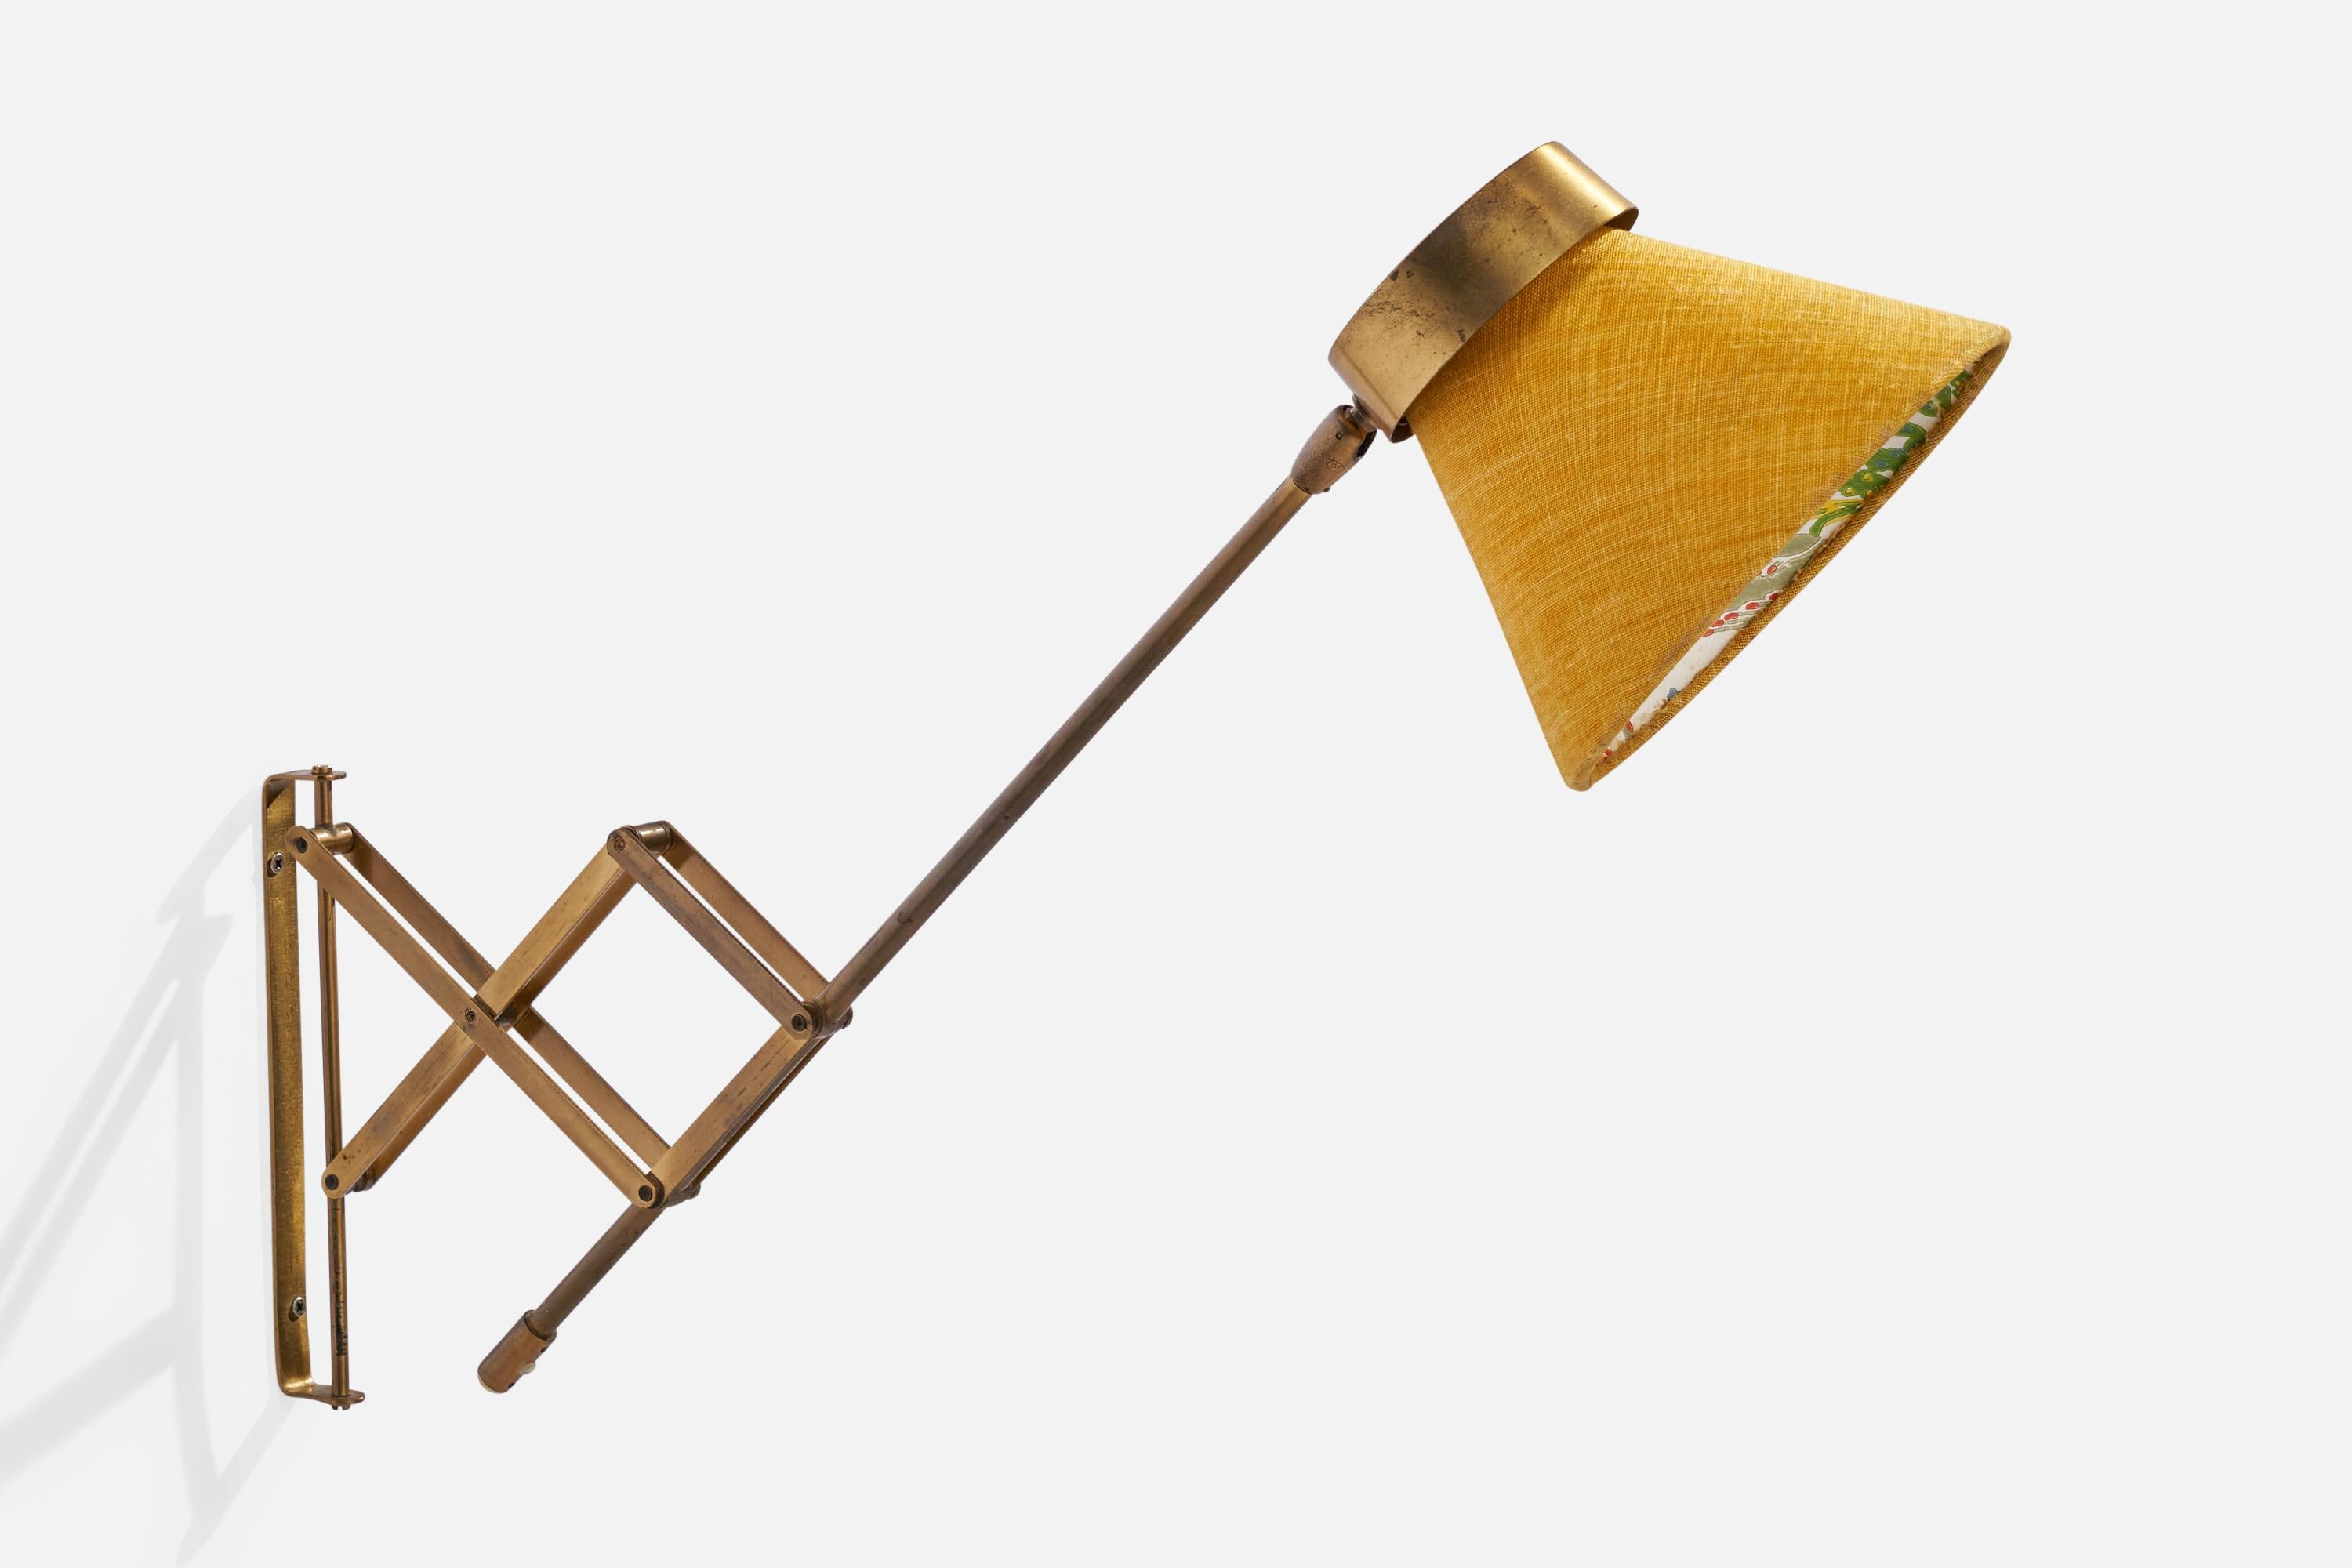 An adjustable brass and yellow fabric wall light designed and produced by T.H. Valentiner, Denmark, 1950s.

Please note lamp is configured for plug-in. With cord feeding from bottom of stem.

Overall Dimensions (inches): 21.5”  H x 6.75” W x 26.5”